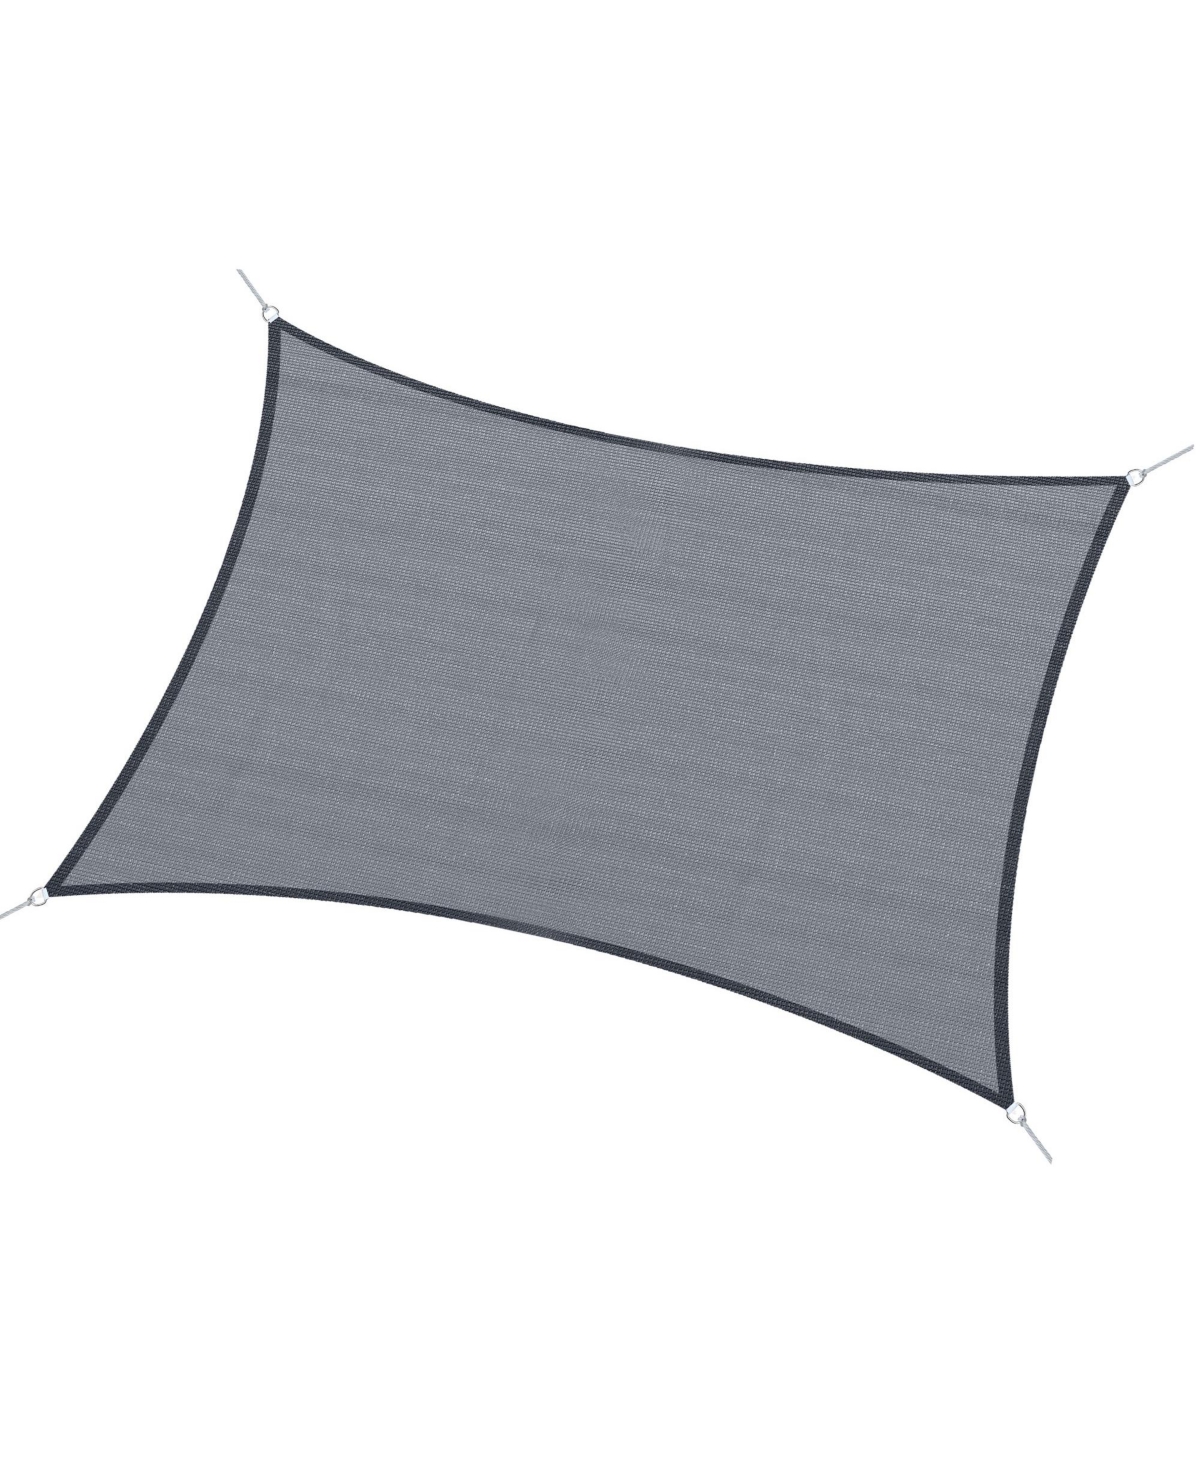 20' x 13' Rectangle Sun Shade Sail Canopy Outdoor Shade Sail Cloth for Patio Deck Yard with D-Rings and Rope Included - Grey - Grey